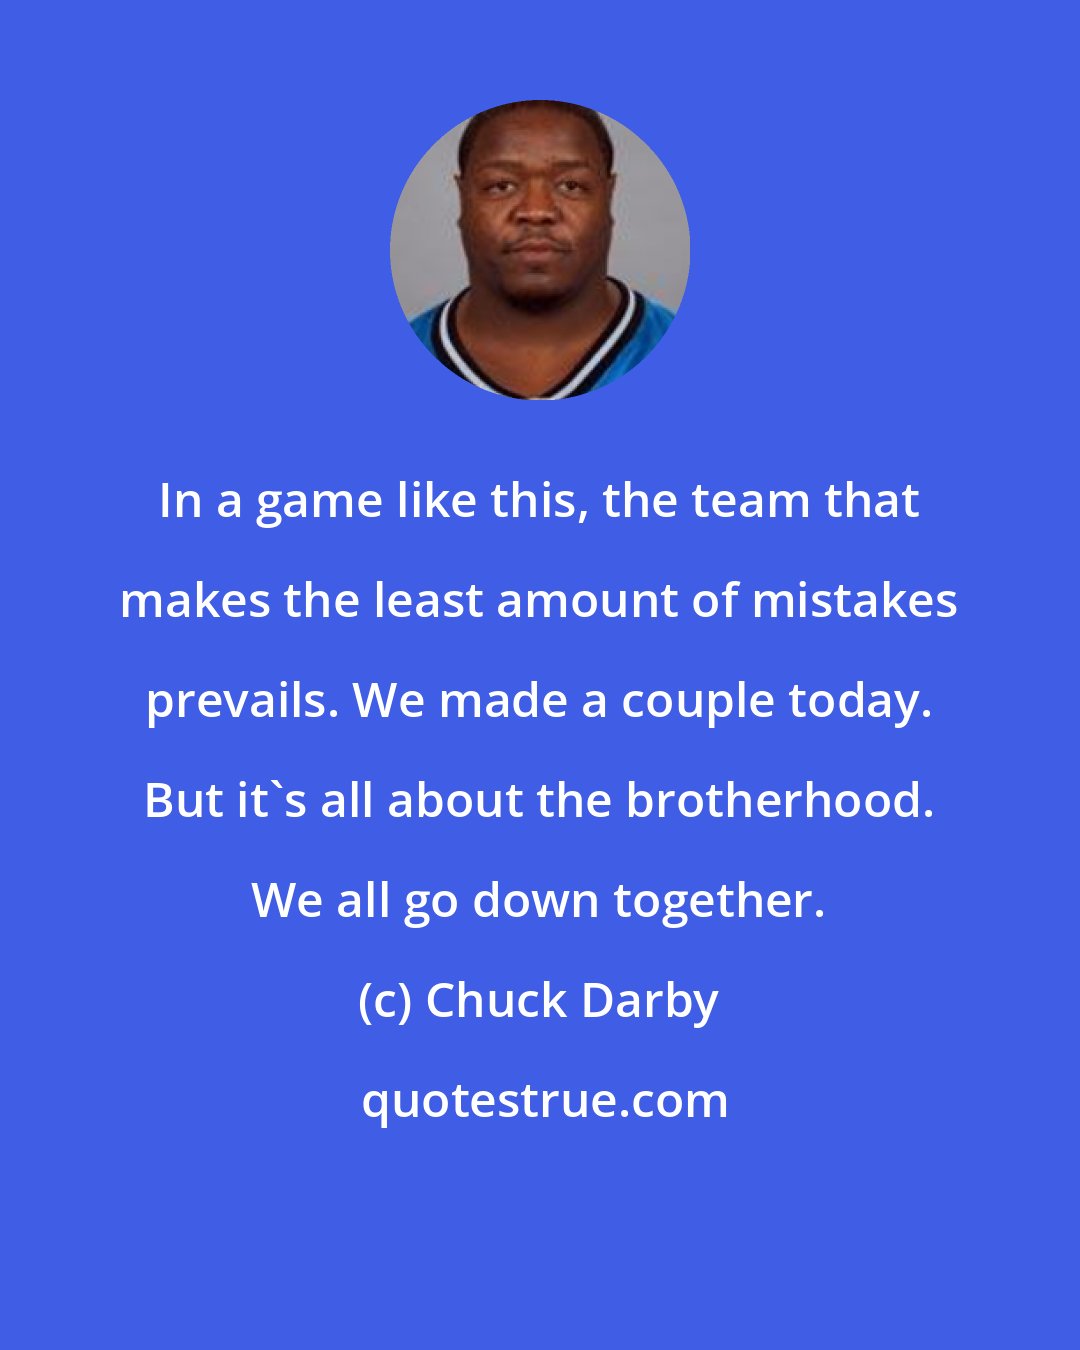 Chuck Darby: In a game like this, the team that makes the least amount of mistakes prevails. We made a couple today. But it's all about the brotherhood. We all go down together.